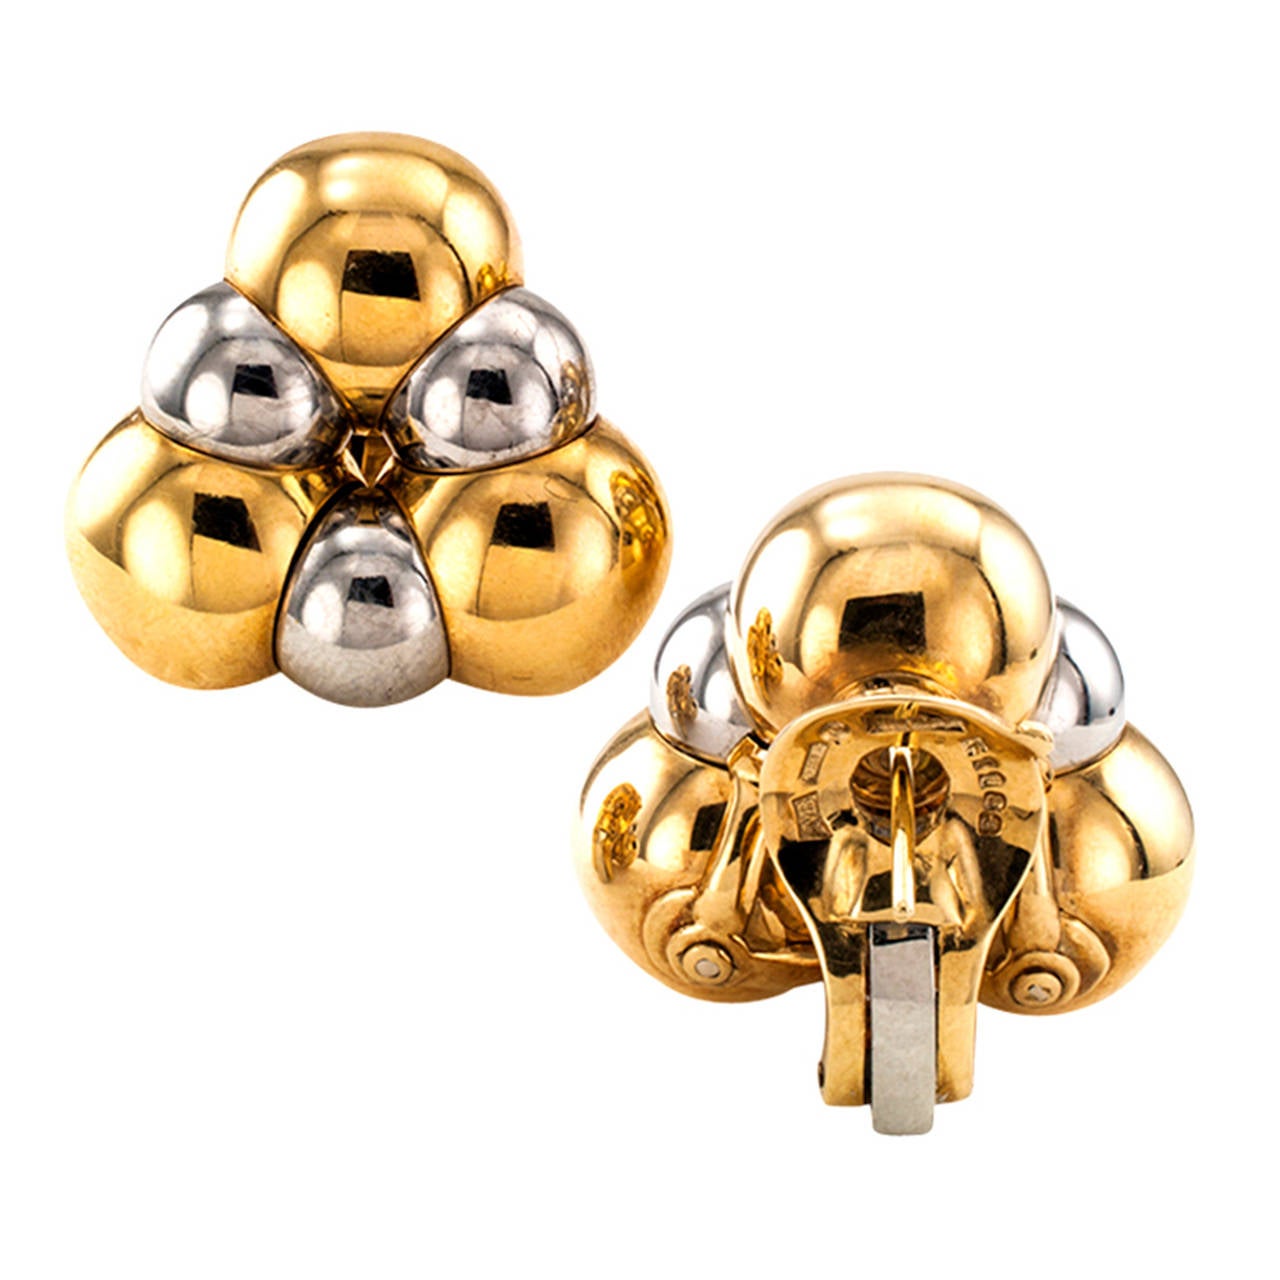 Marina B 18 Karat Gold And Steel Earrings

There is something so whimsical about the idea blending spherical shapes into a triangular design.  And look how Marina B designed the contrast between the deep and cool color of steel with that of the